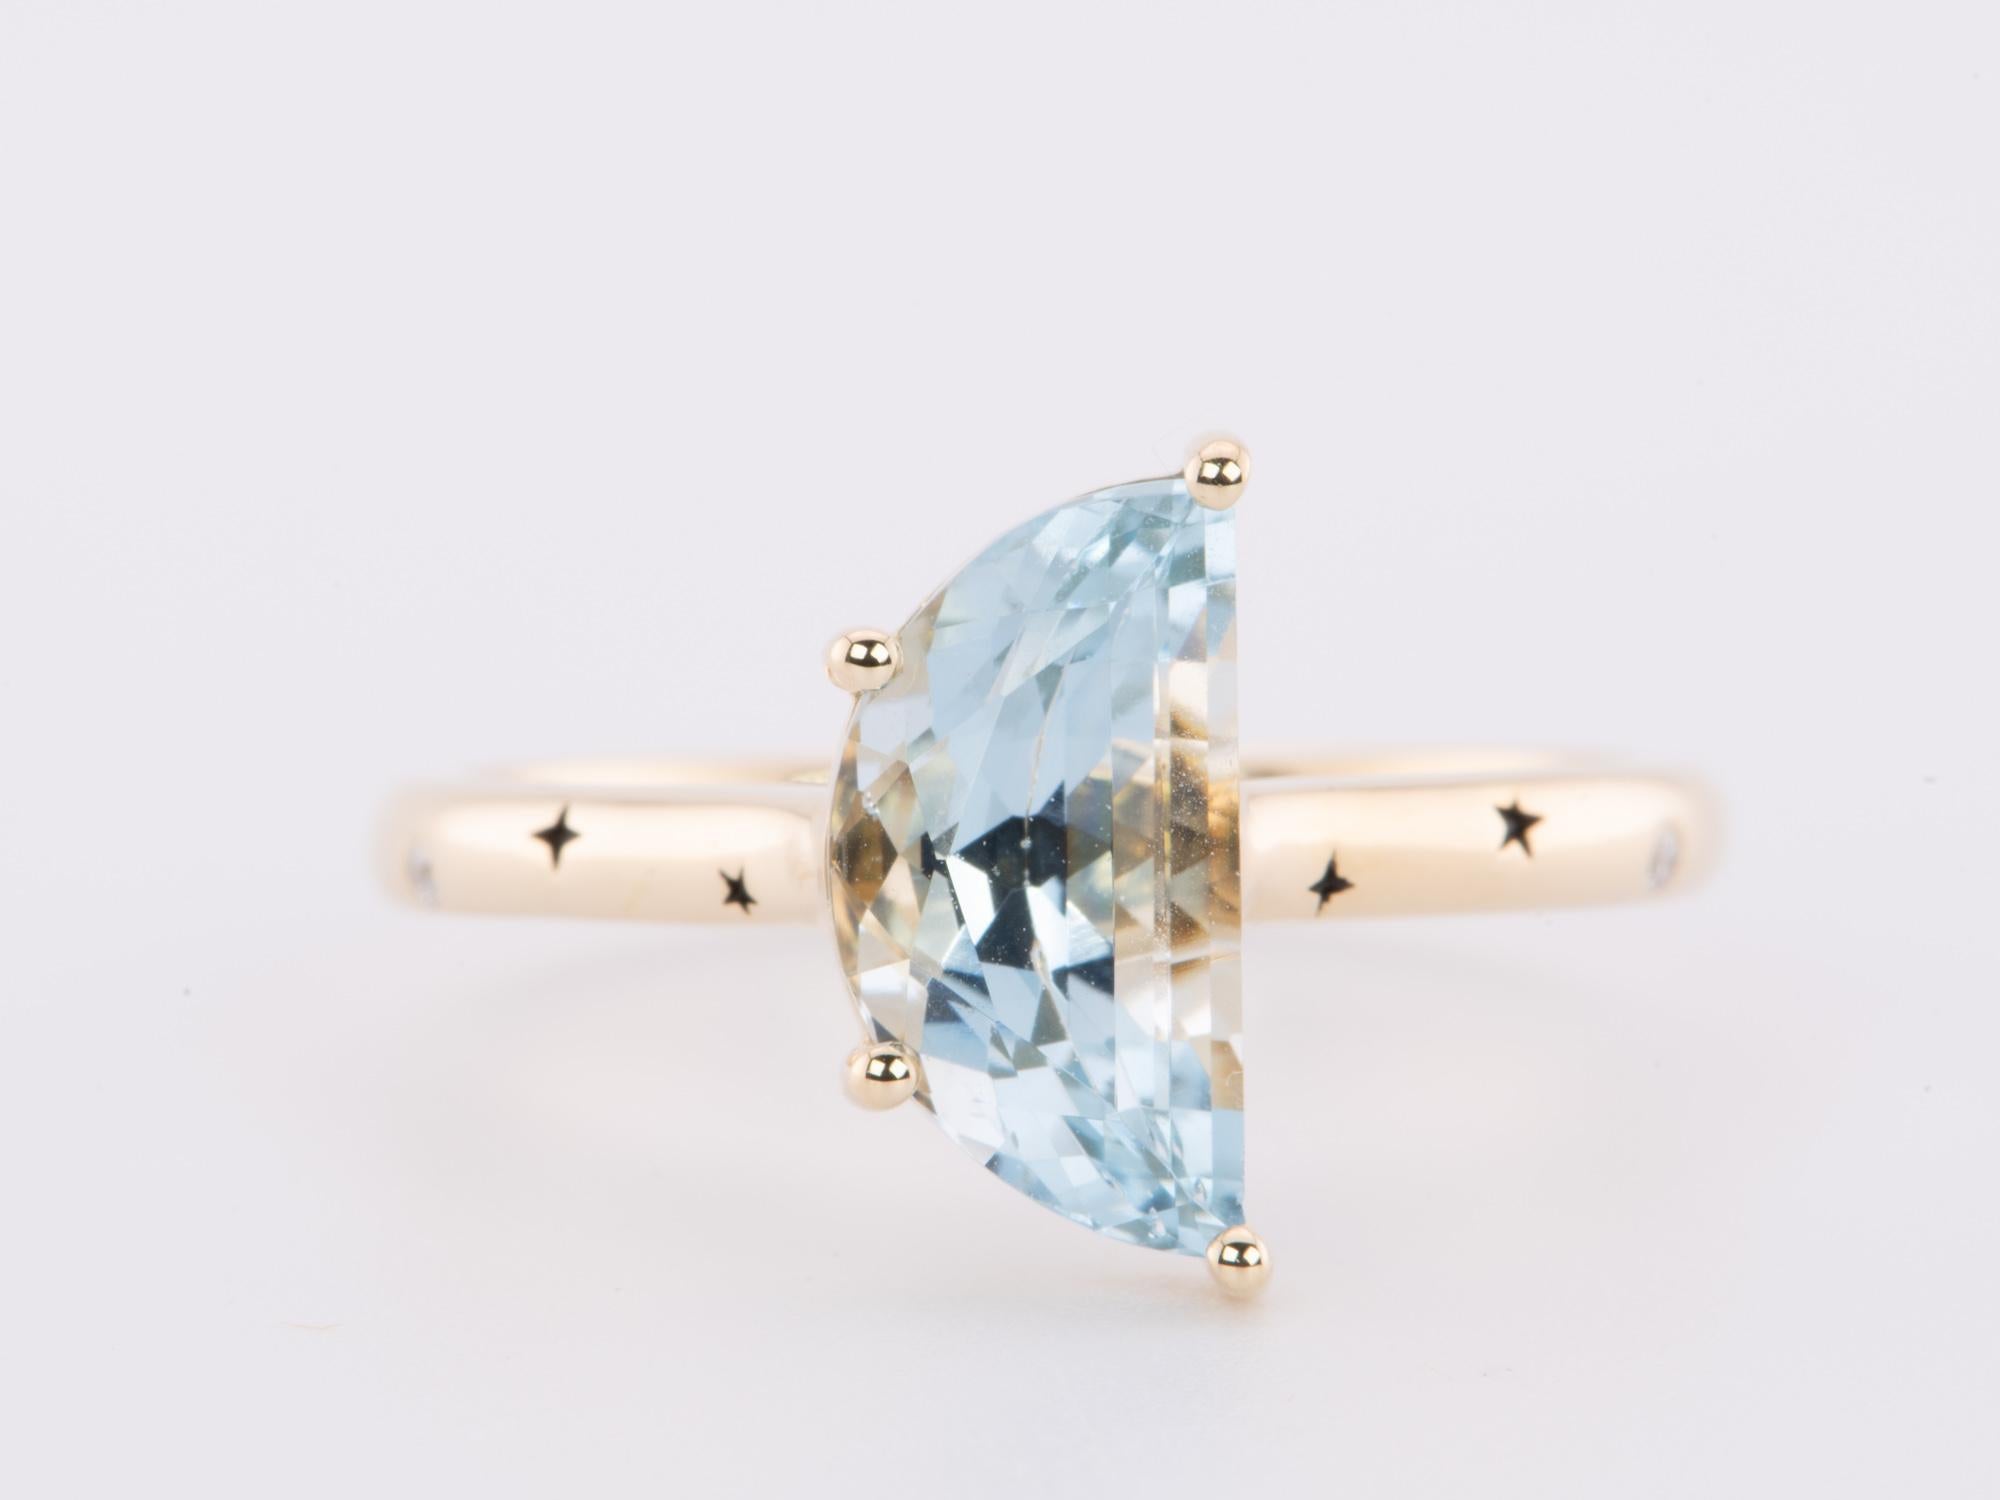 ♥ 2ct Half Moon Aquamarine 14K Gold Engagement Ring Celestial Inspired Band R6646
♥ The item measures 12.5mm in length, 6.3mm in width, and 6.7mm in thickness. Band width is 2.1mm.

♥ Ring size: US Size 7 (Free resizing up or down 1 size)
♥